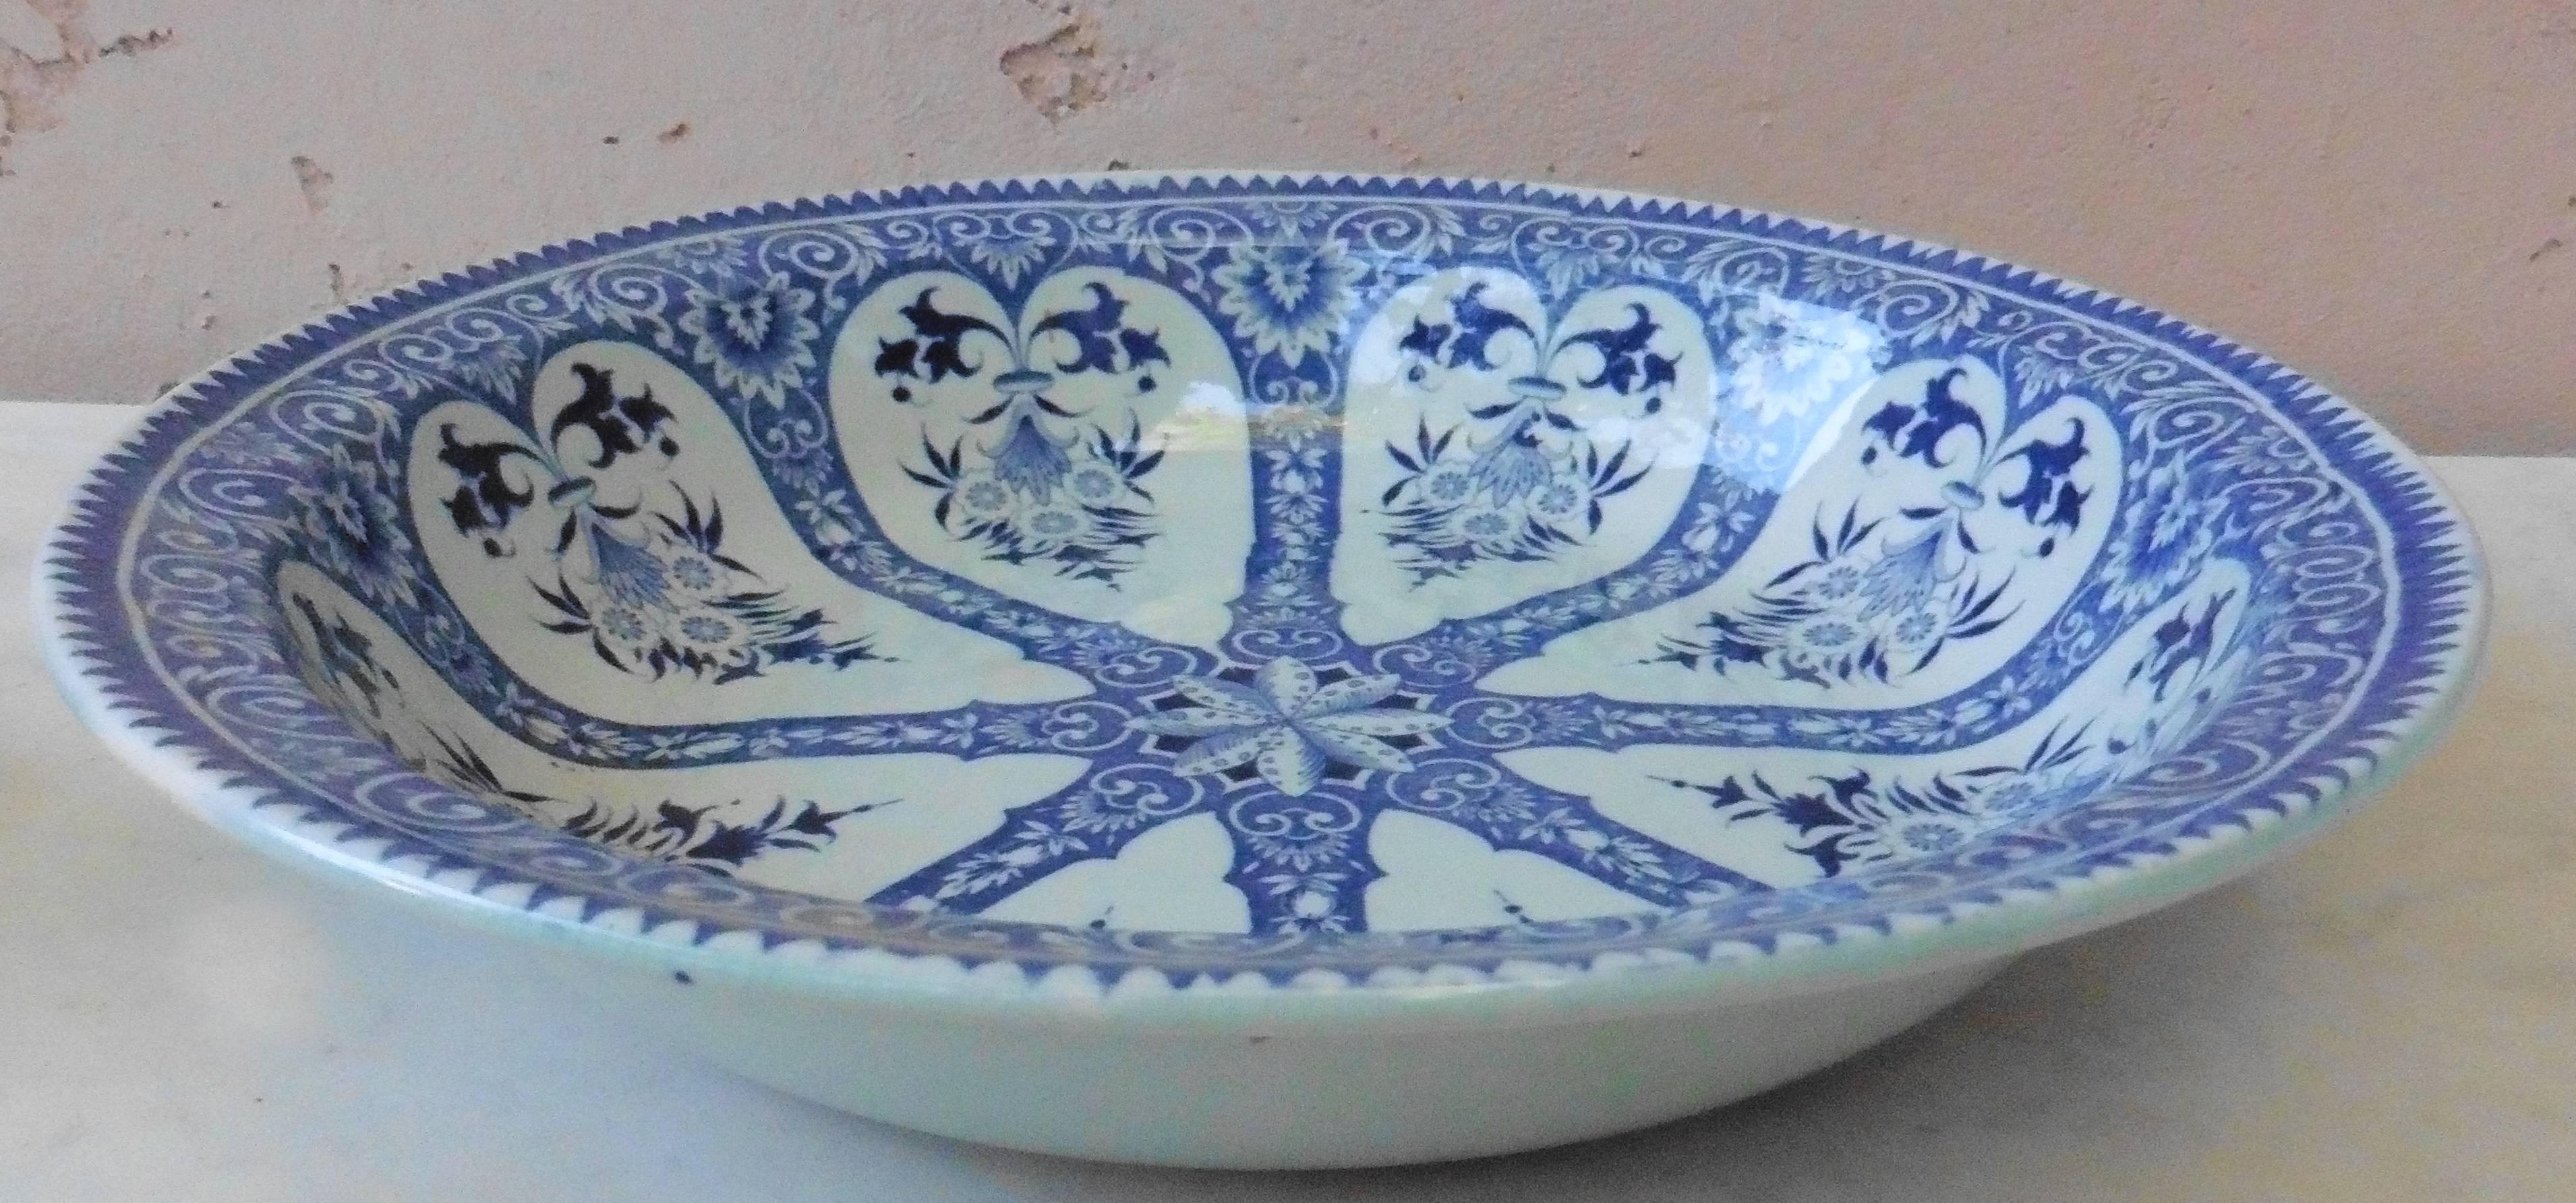 Large French blue and white faience round platter signed Sarreguemines Service Francois.